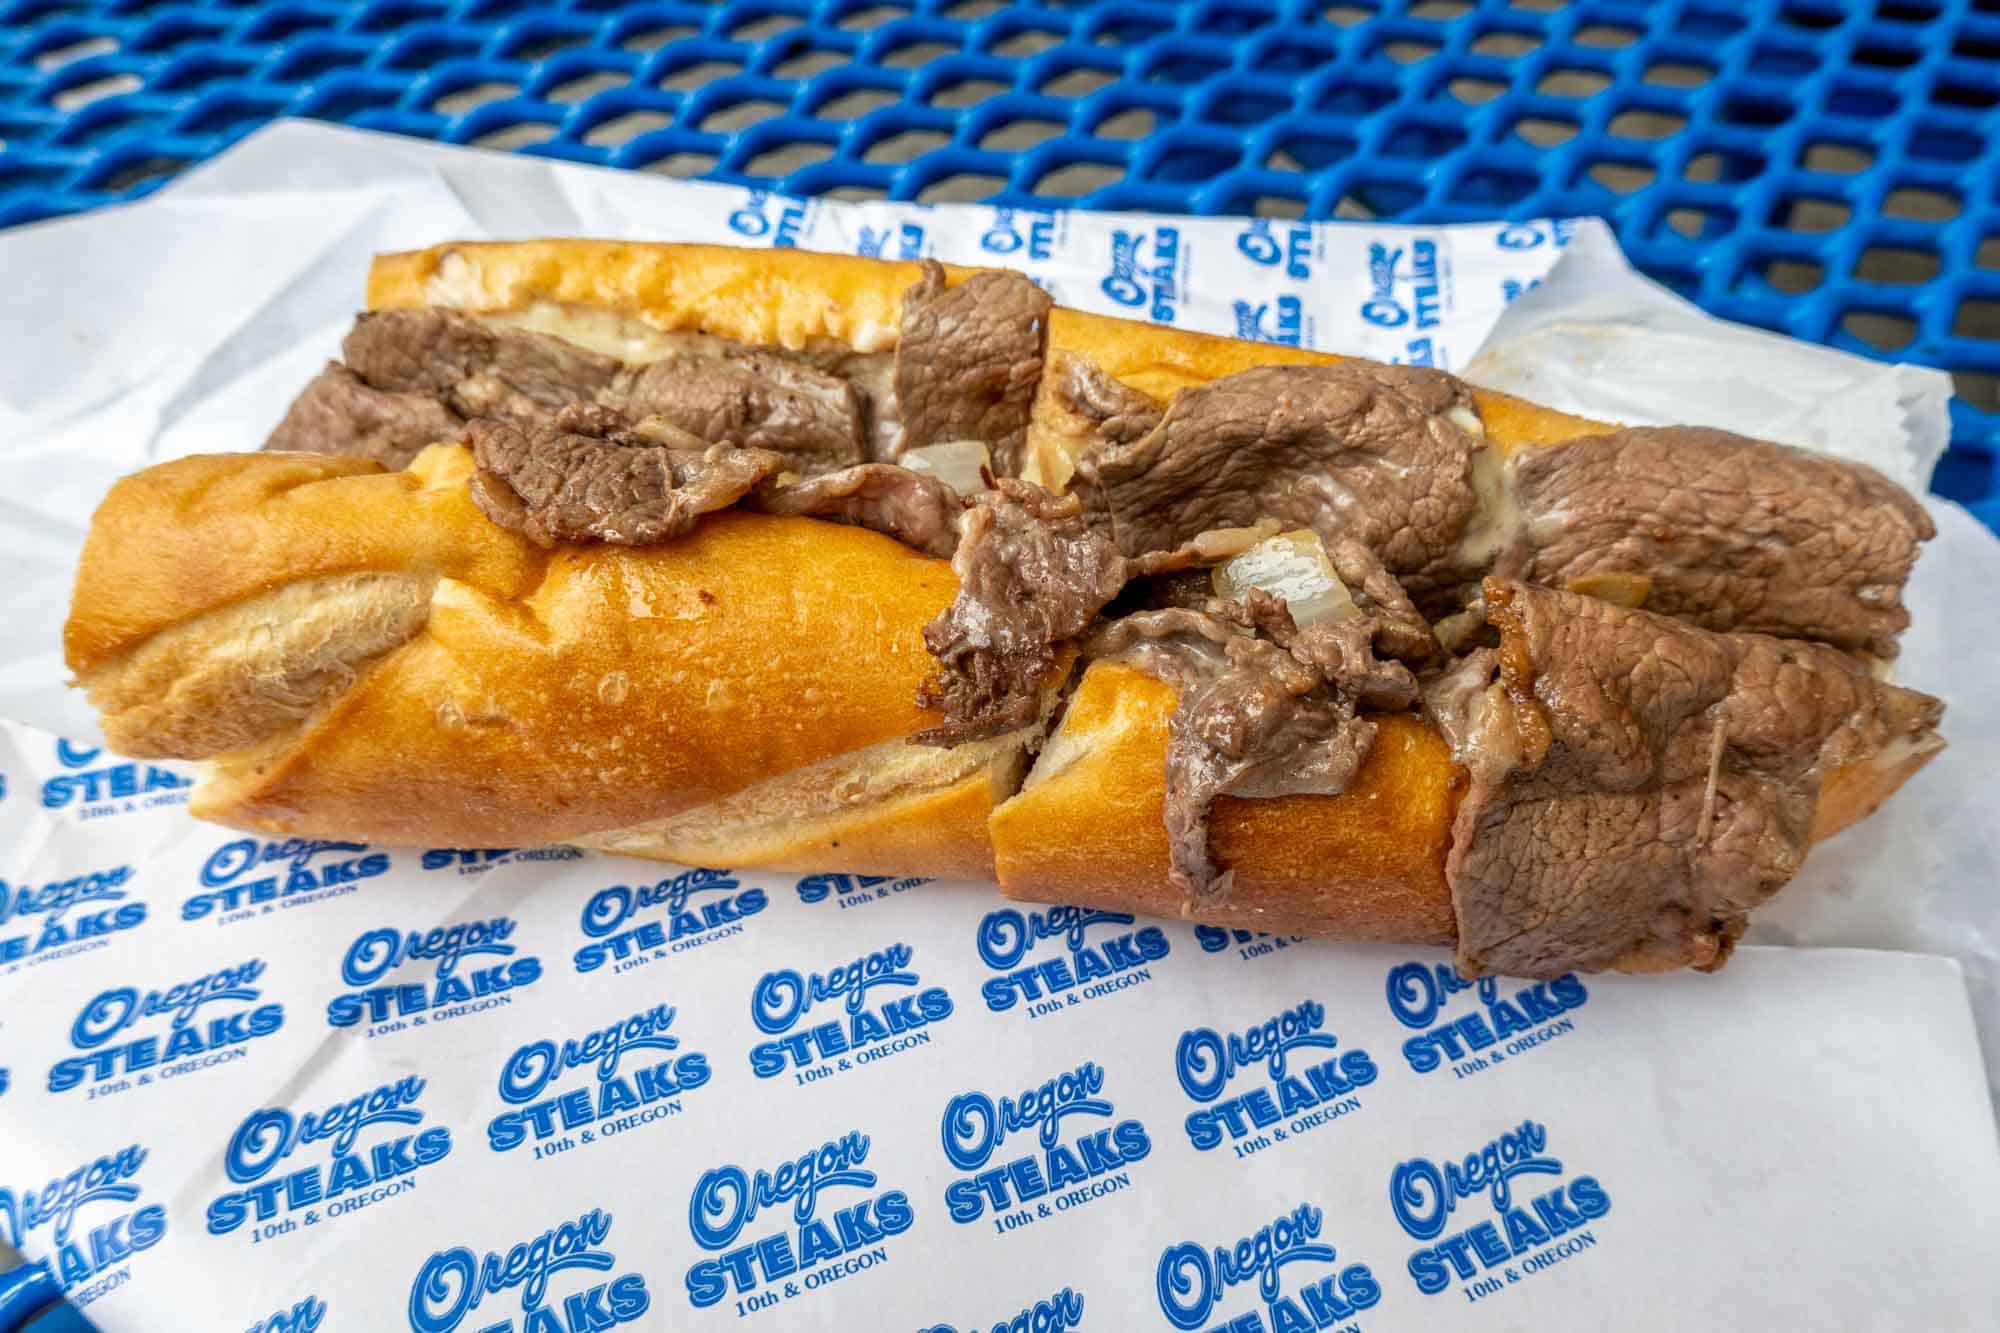 Cheesesteak on a wrapper that says Oregon Steaks